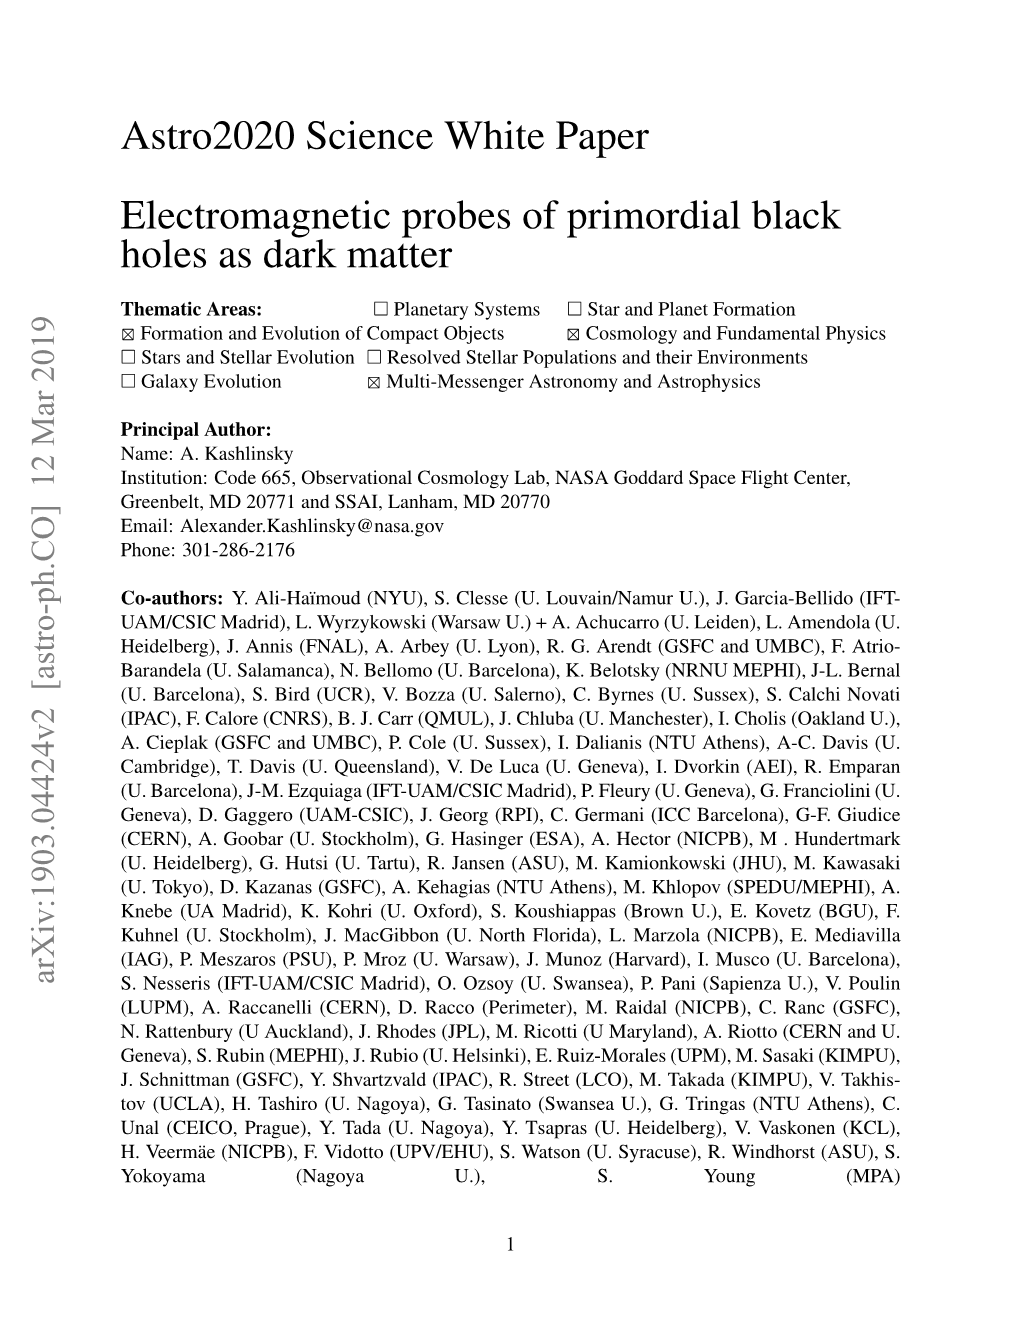 Astro2020 Science White Paper Electromagnetic Probes of Primordial Black Holes As Dark Matter